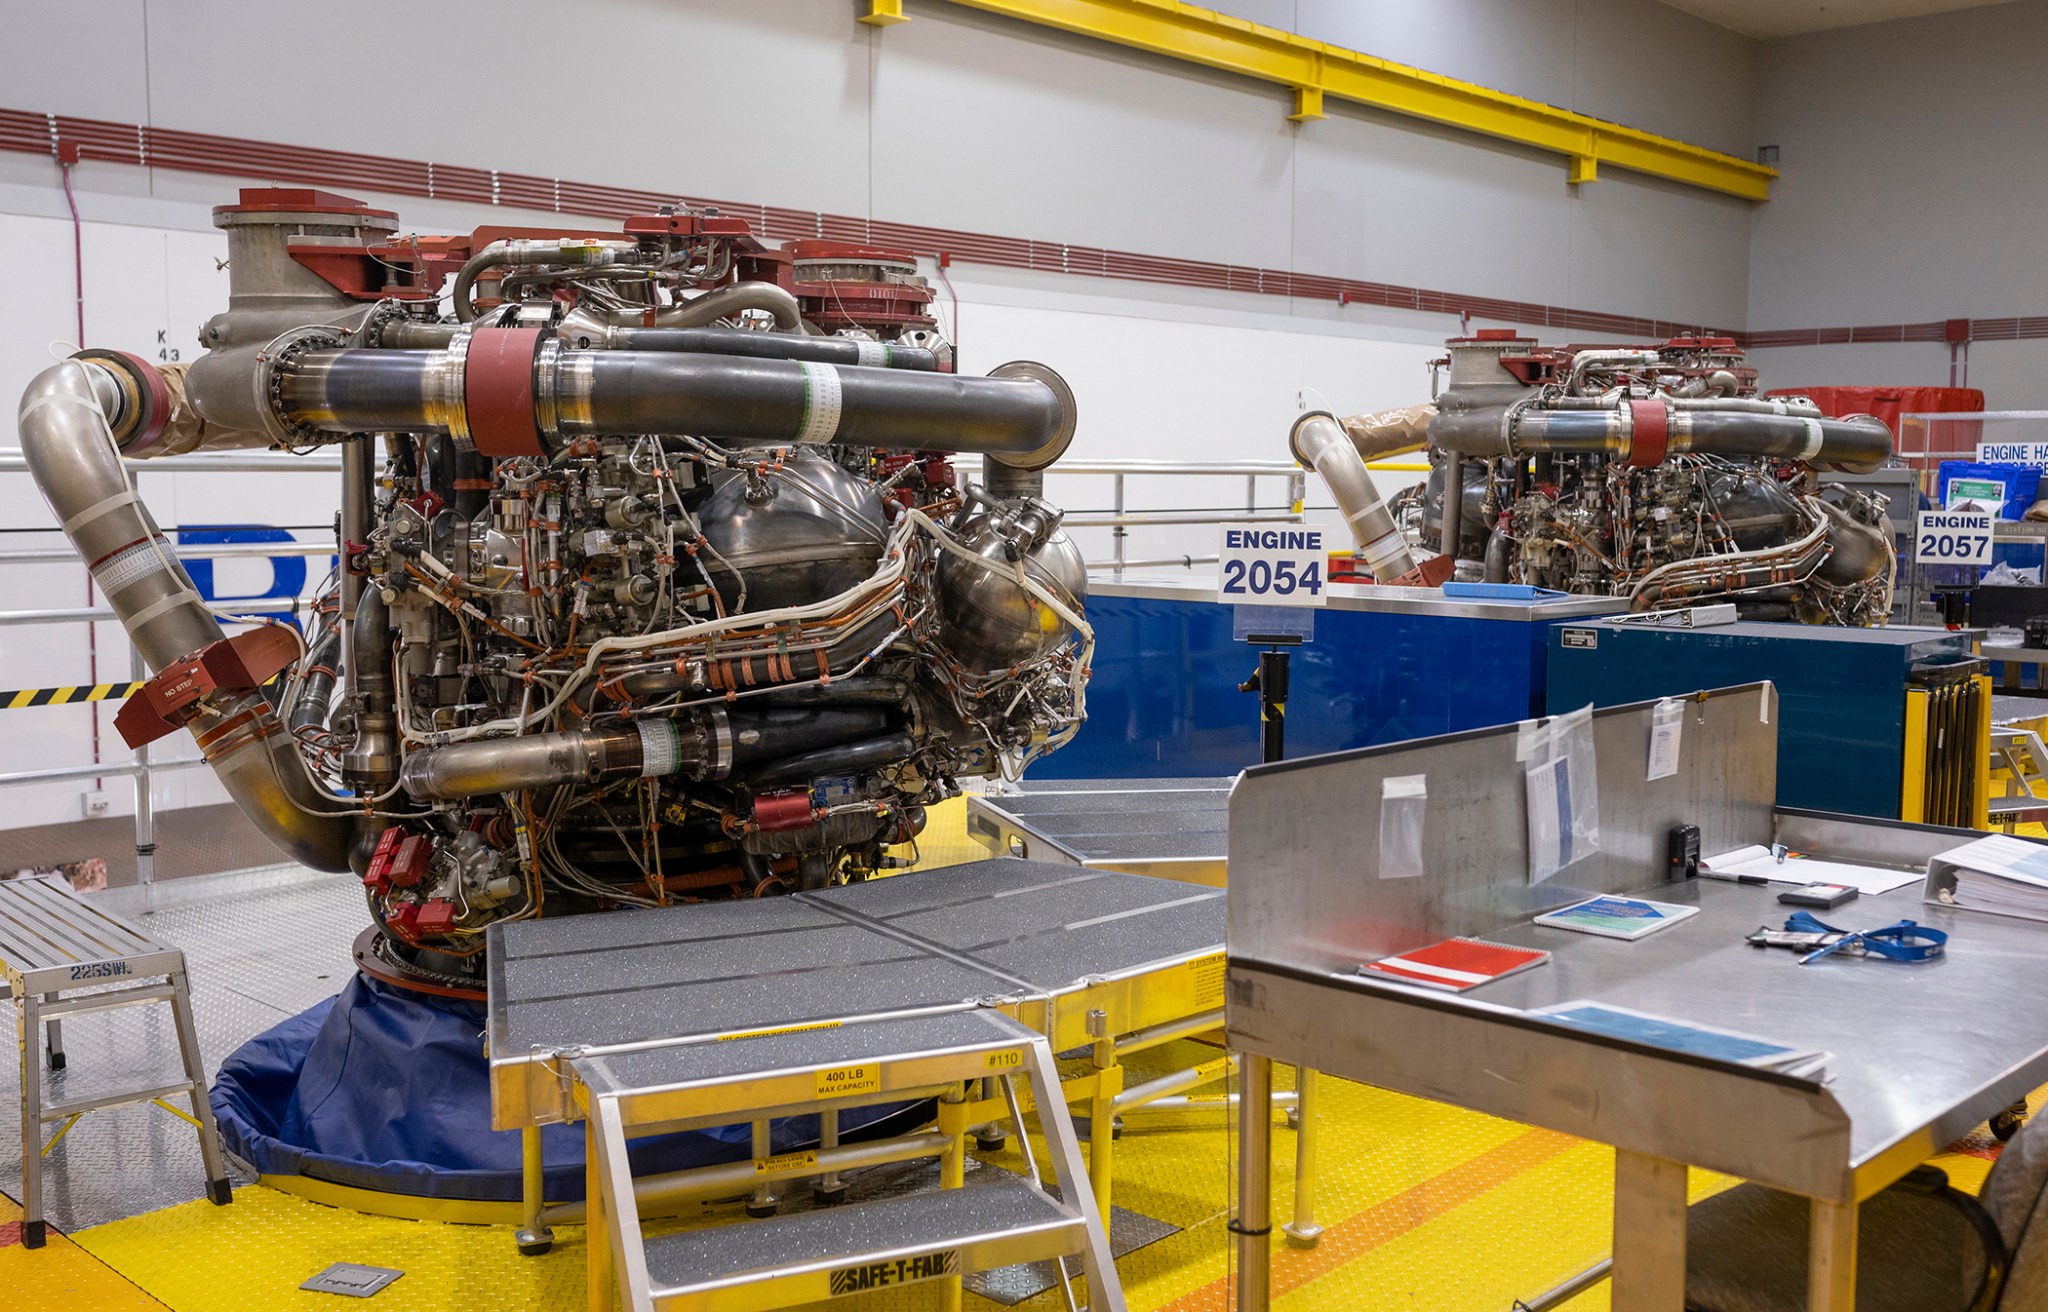 RS-25 main engines 2054 and 2057